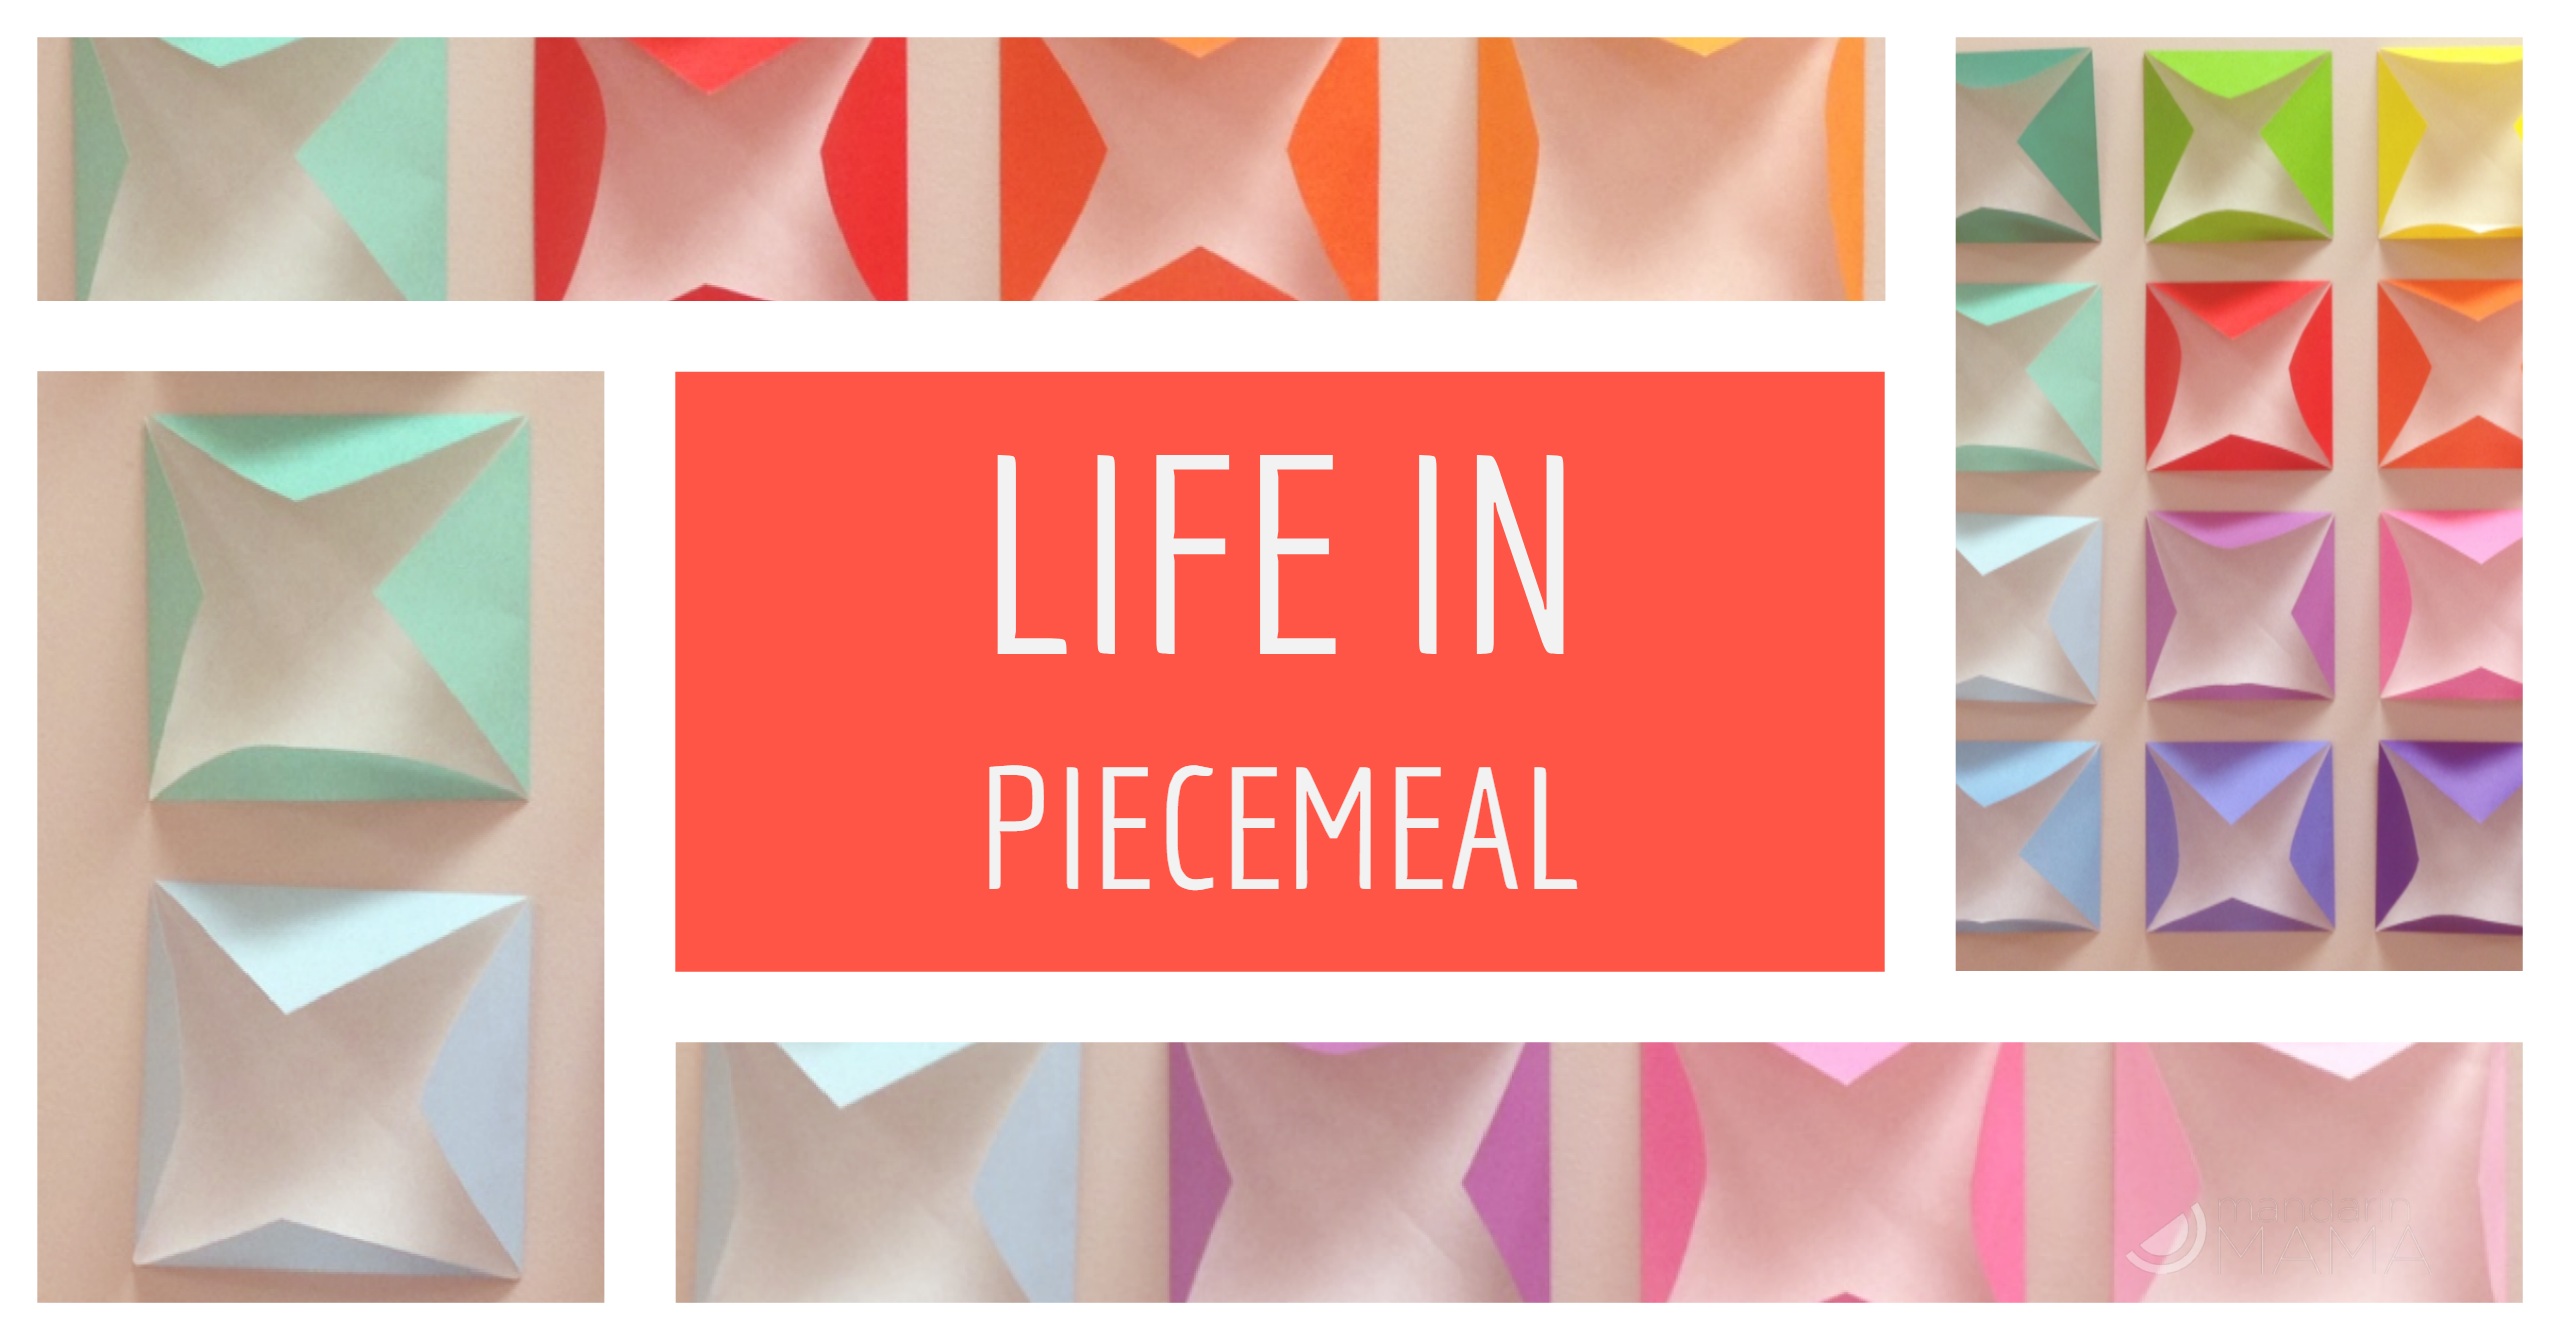 Life in Piecemeal